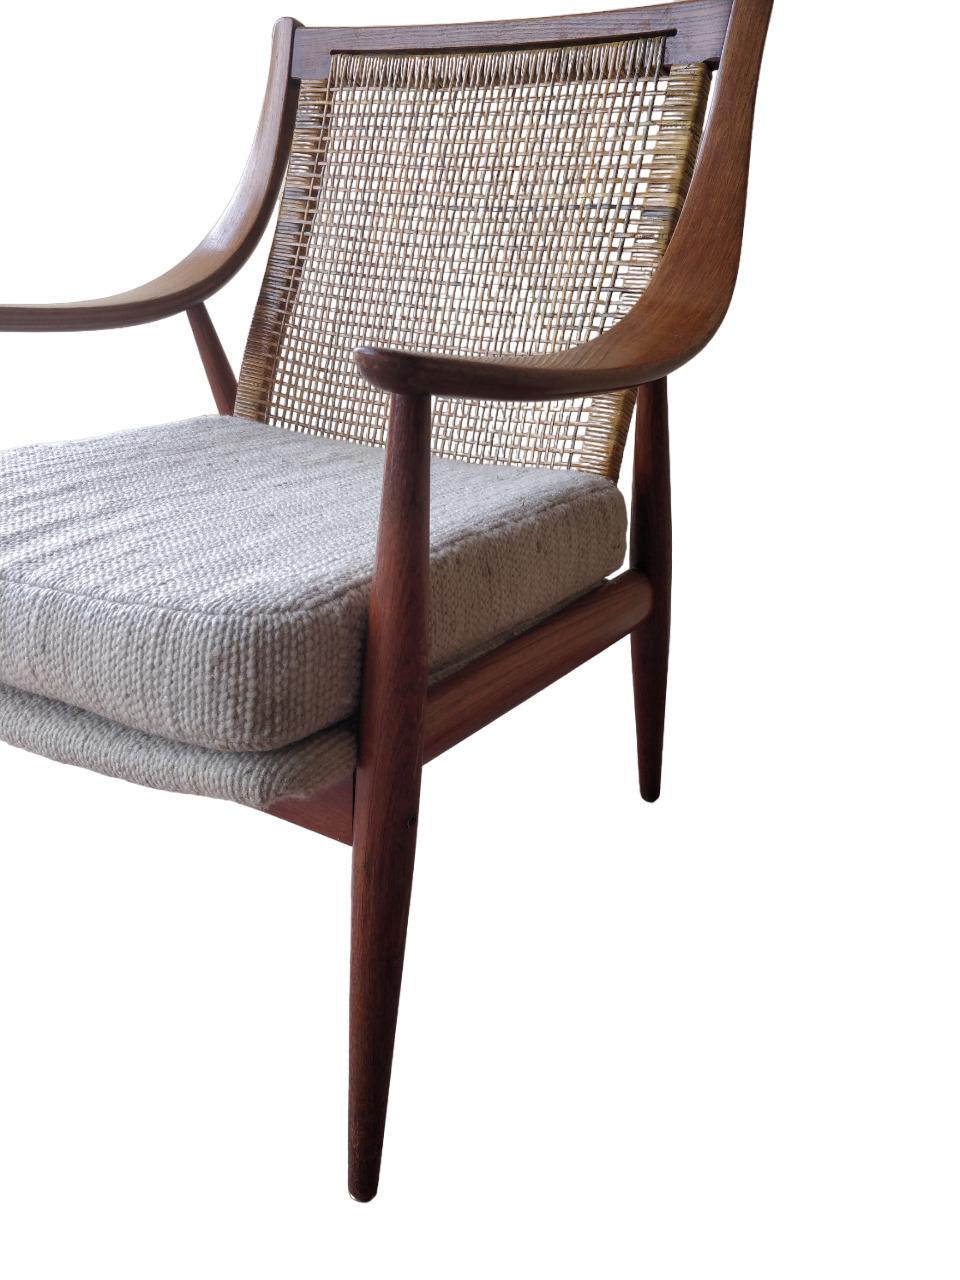 The model 147 chair designed by Peter Hvidt & Orla Molgaard Nielsen for France and son, is one of the most graceful Danish Modern chairs. A combination of the very expressive fluid lines of the frame with the rattan backrest allowing light to pass